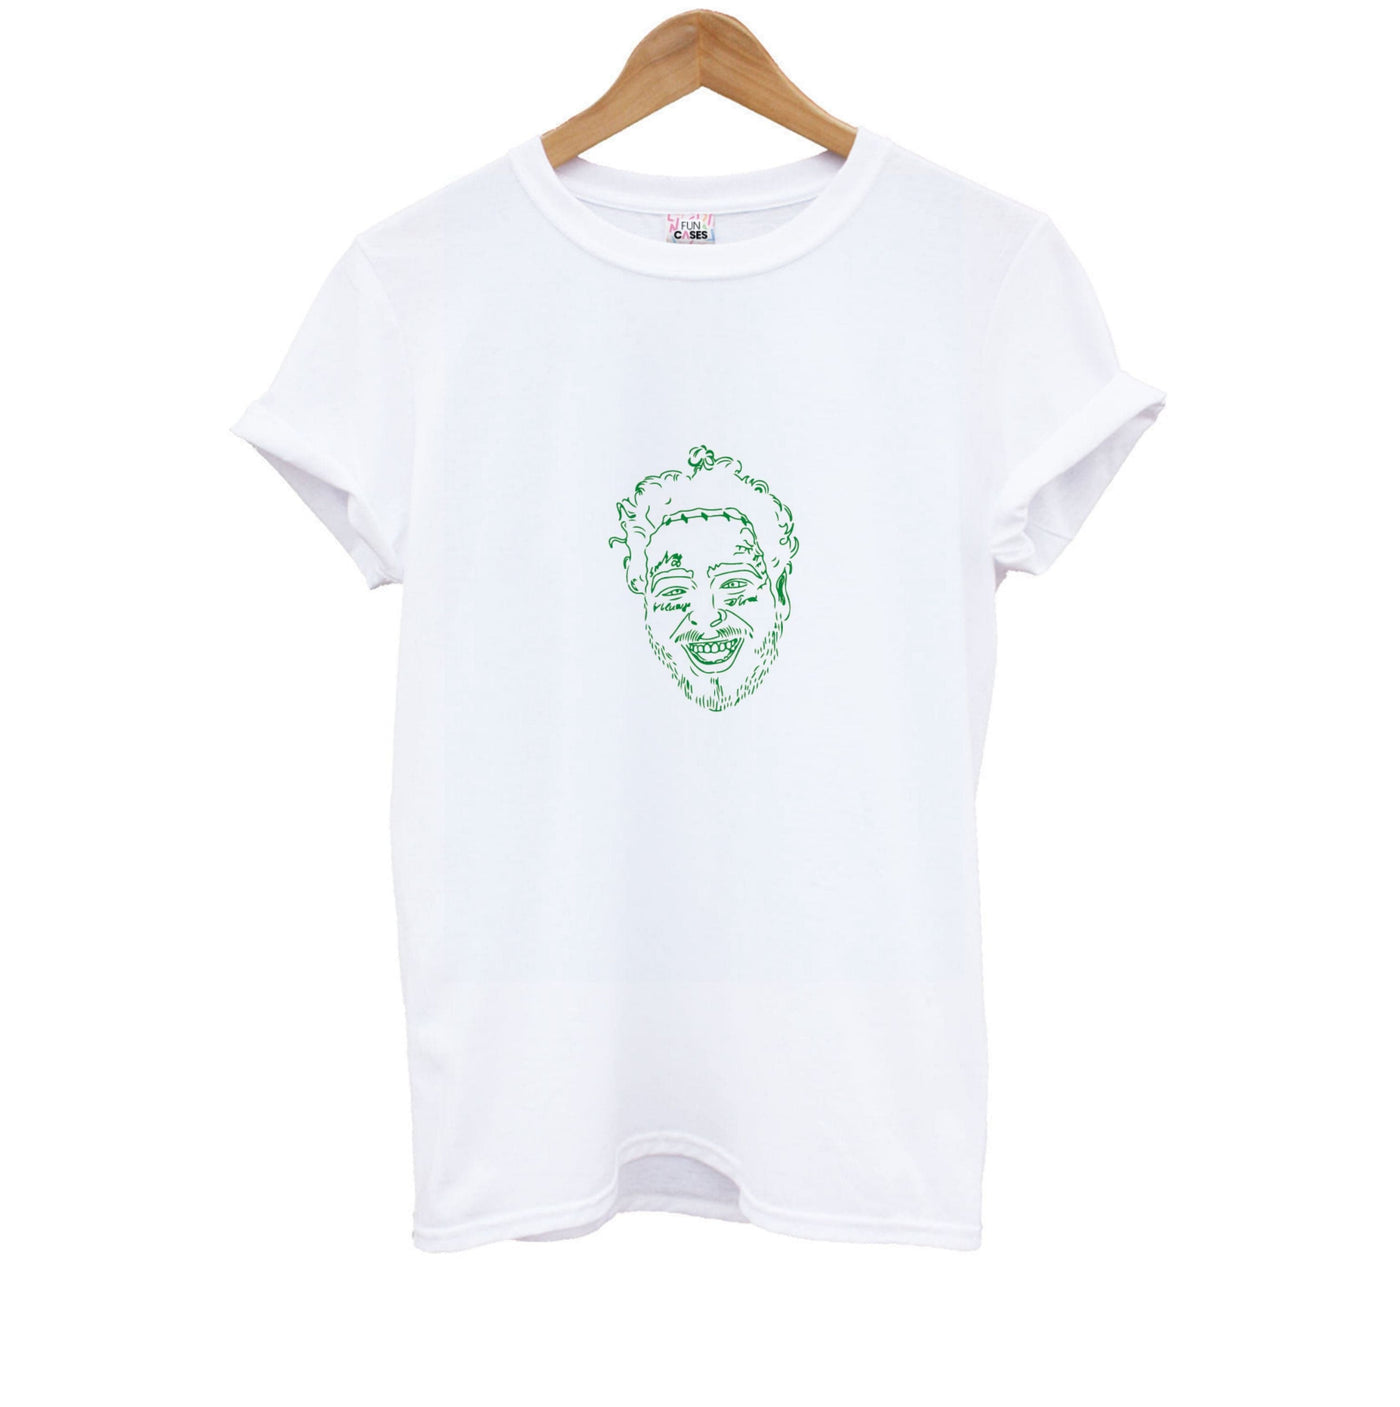 Outline - Post Malone Kids T-Shirt